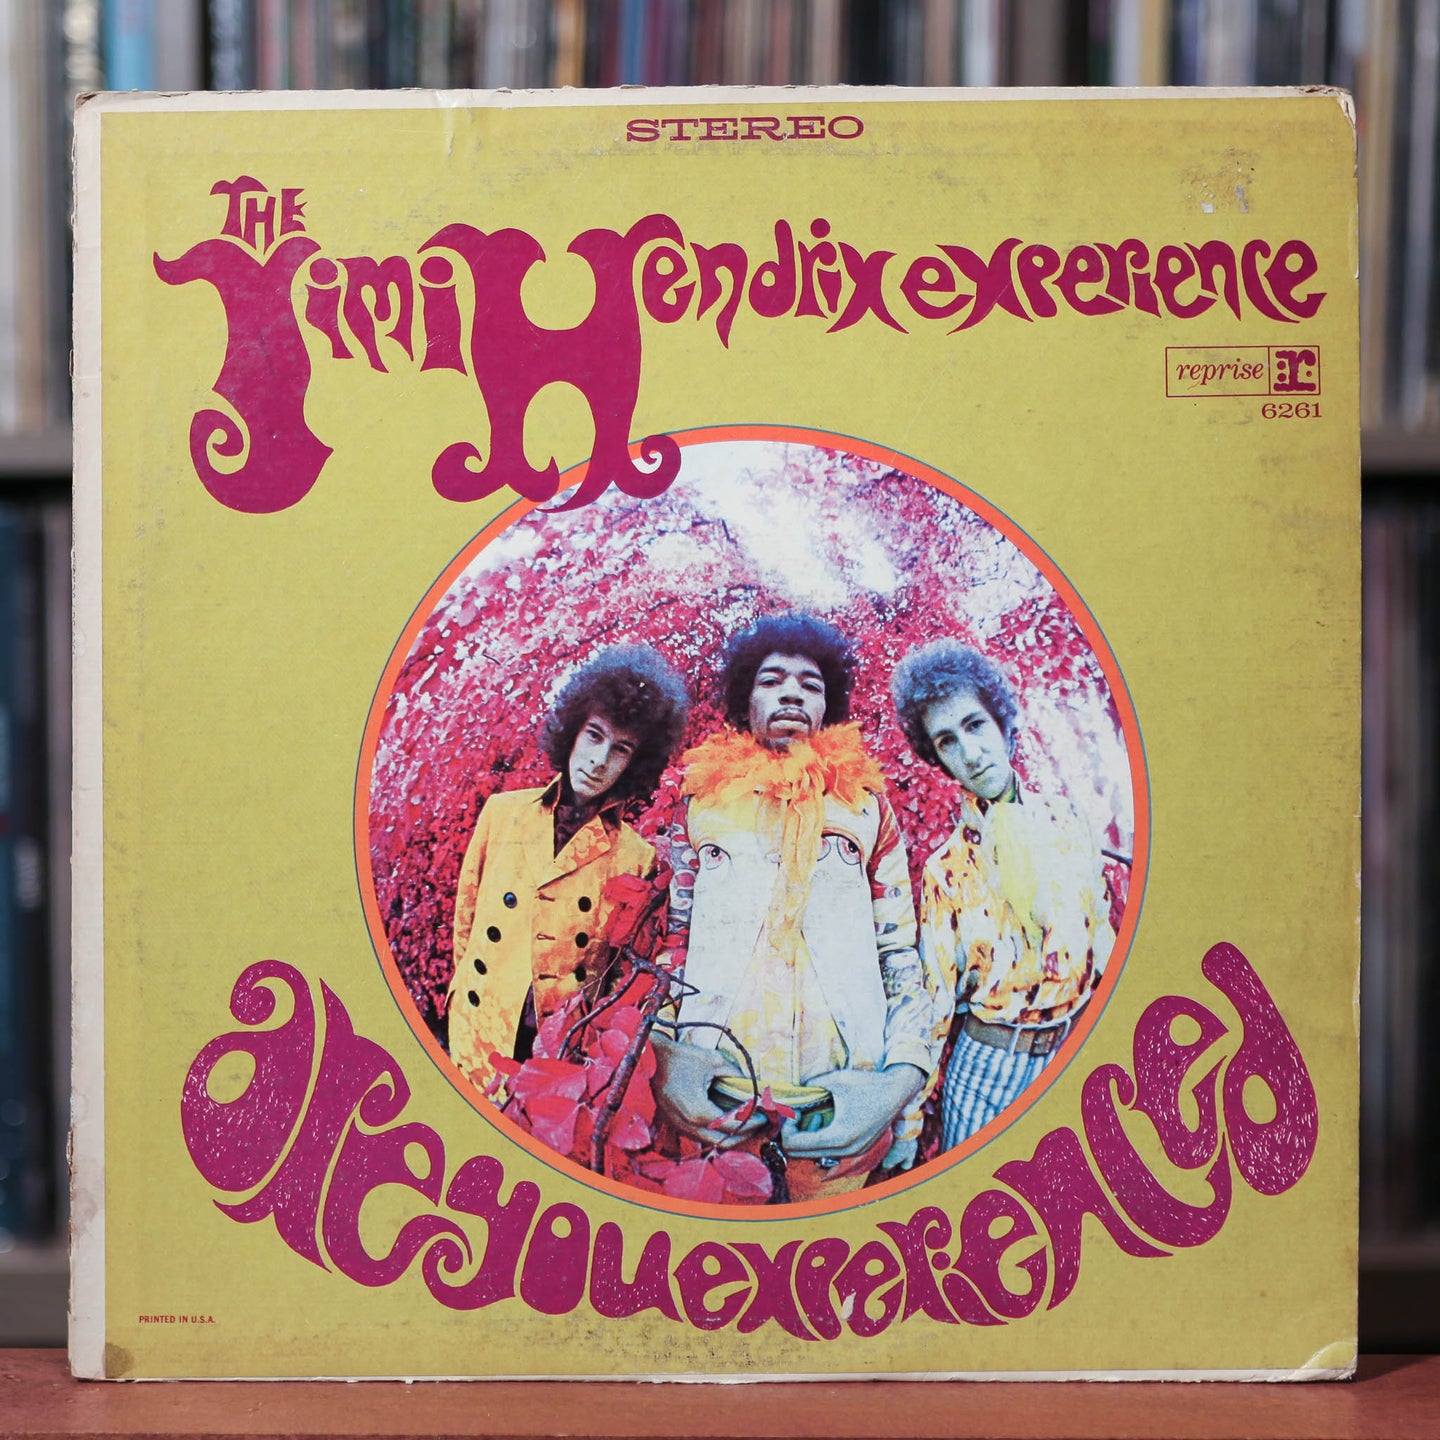 The Jimi Hendrix Experience - Are You Experienced?- 1967 Reprise, G+/G+